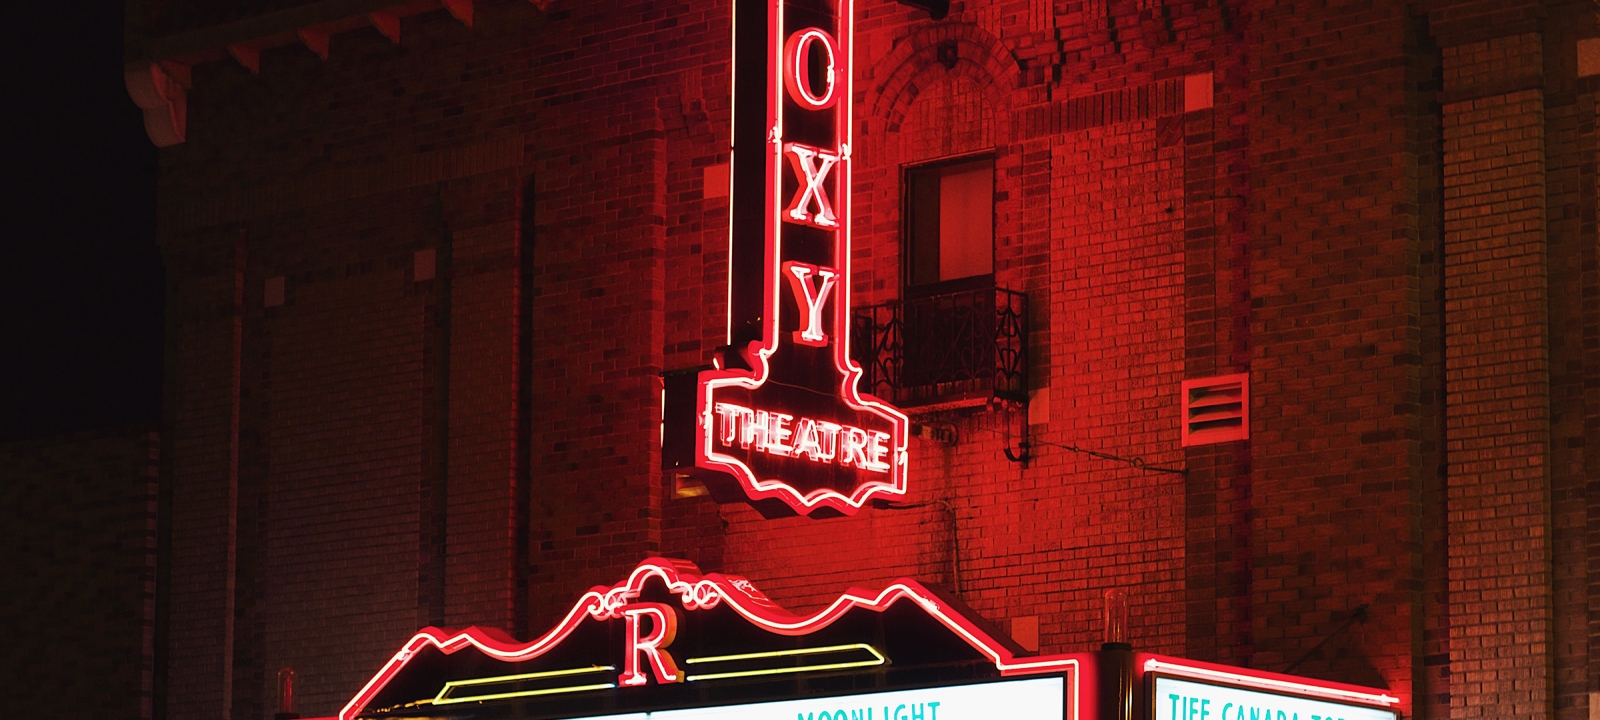 The Roxy Theatre is the Wintertime Place to Go